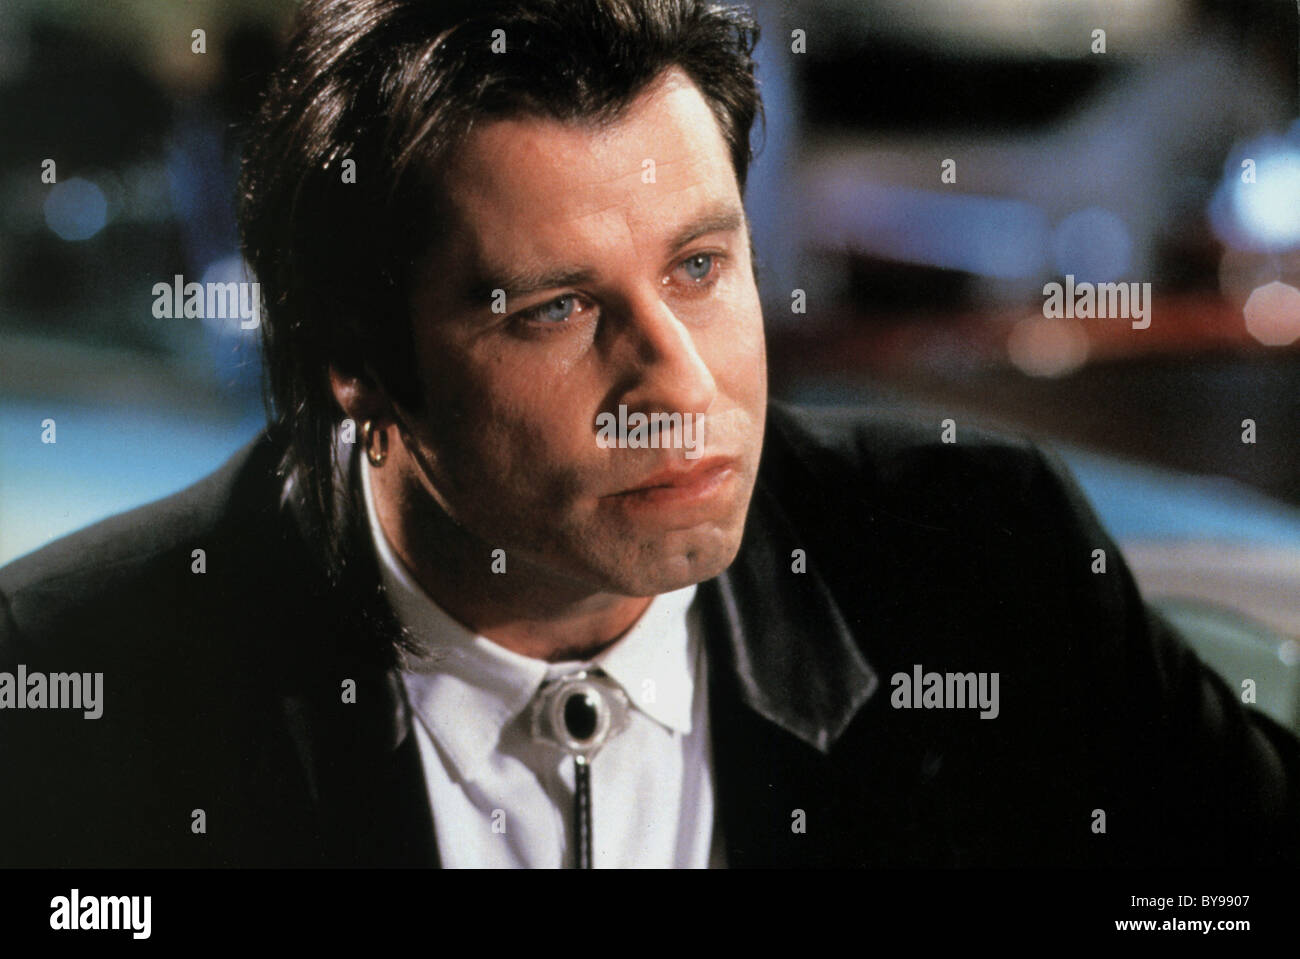 488 Pulp Fiction Film Title Stock Photos, High-Res Pictures, and